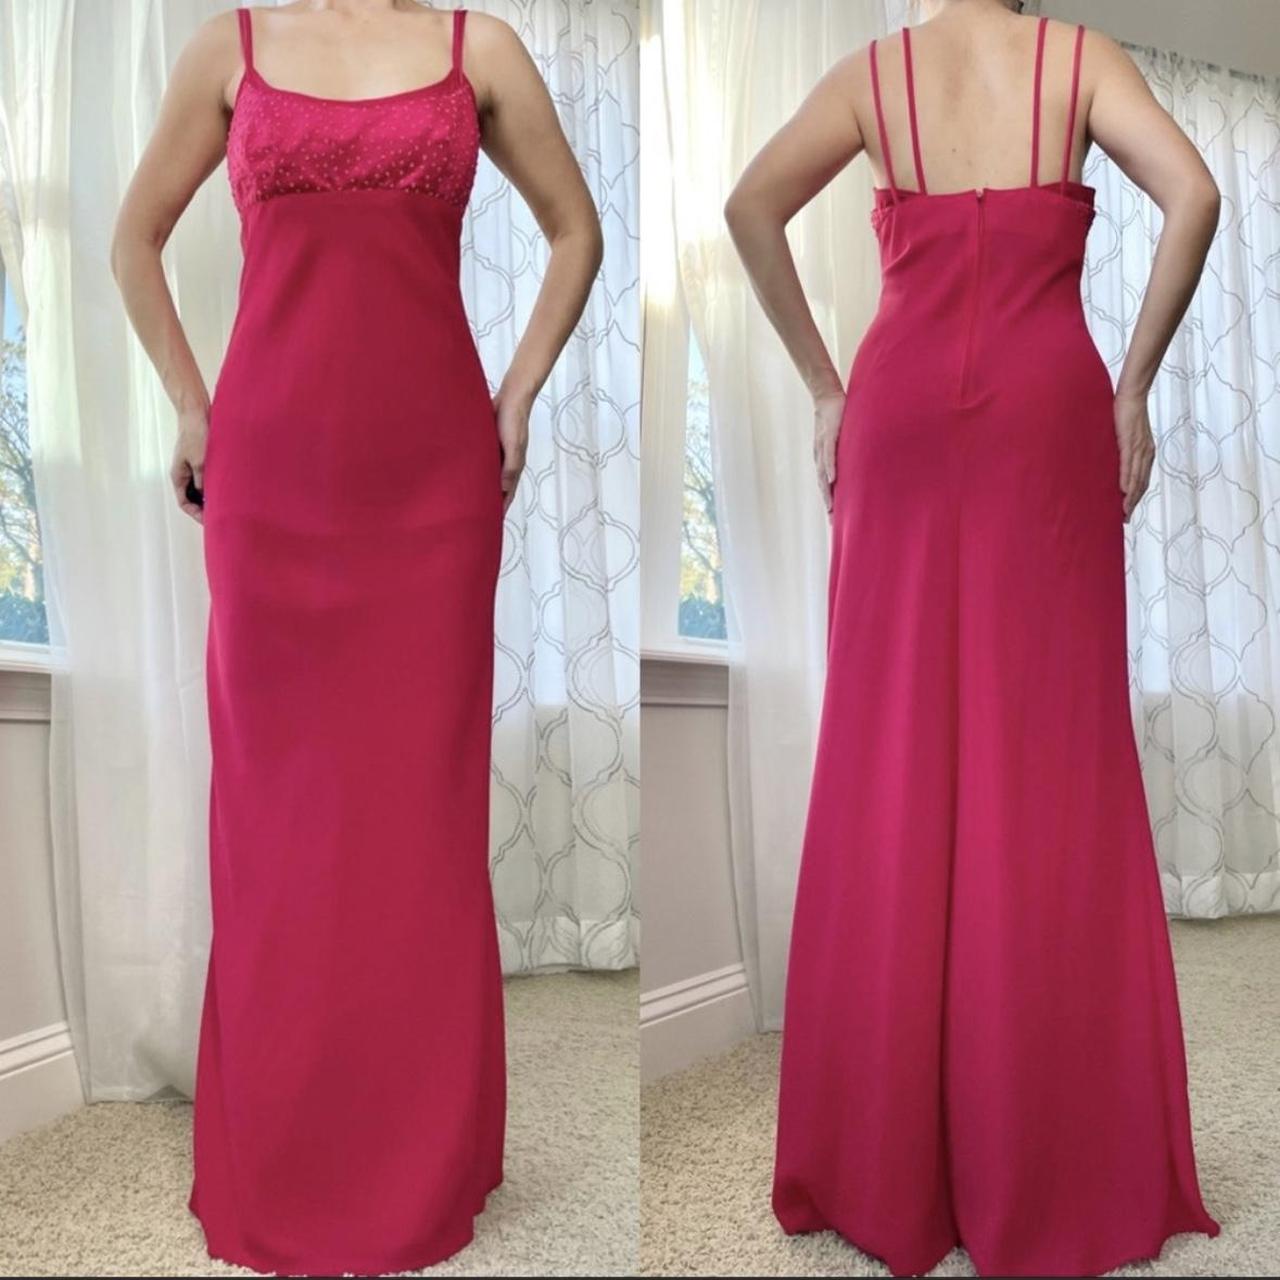 Women's Red and Pink Dress